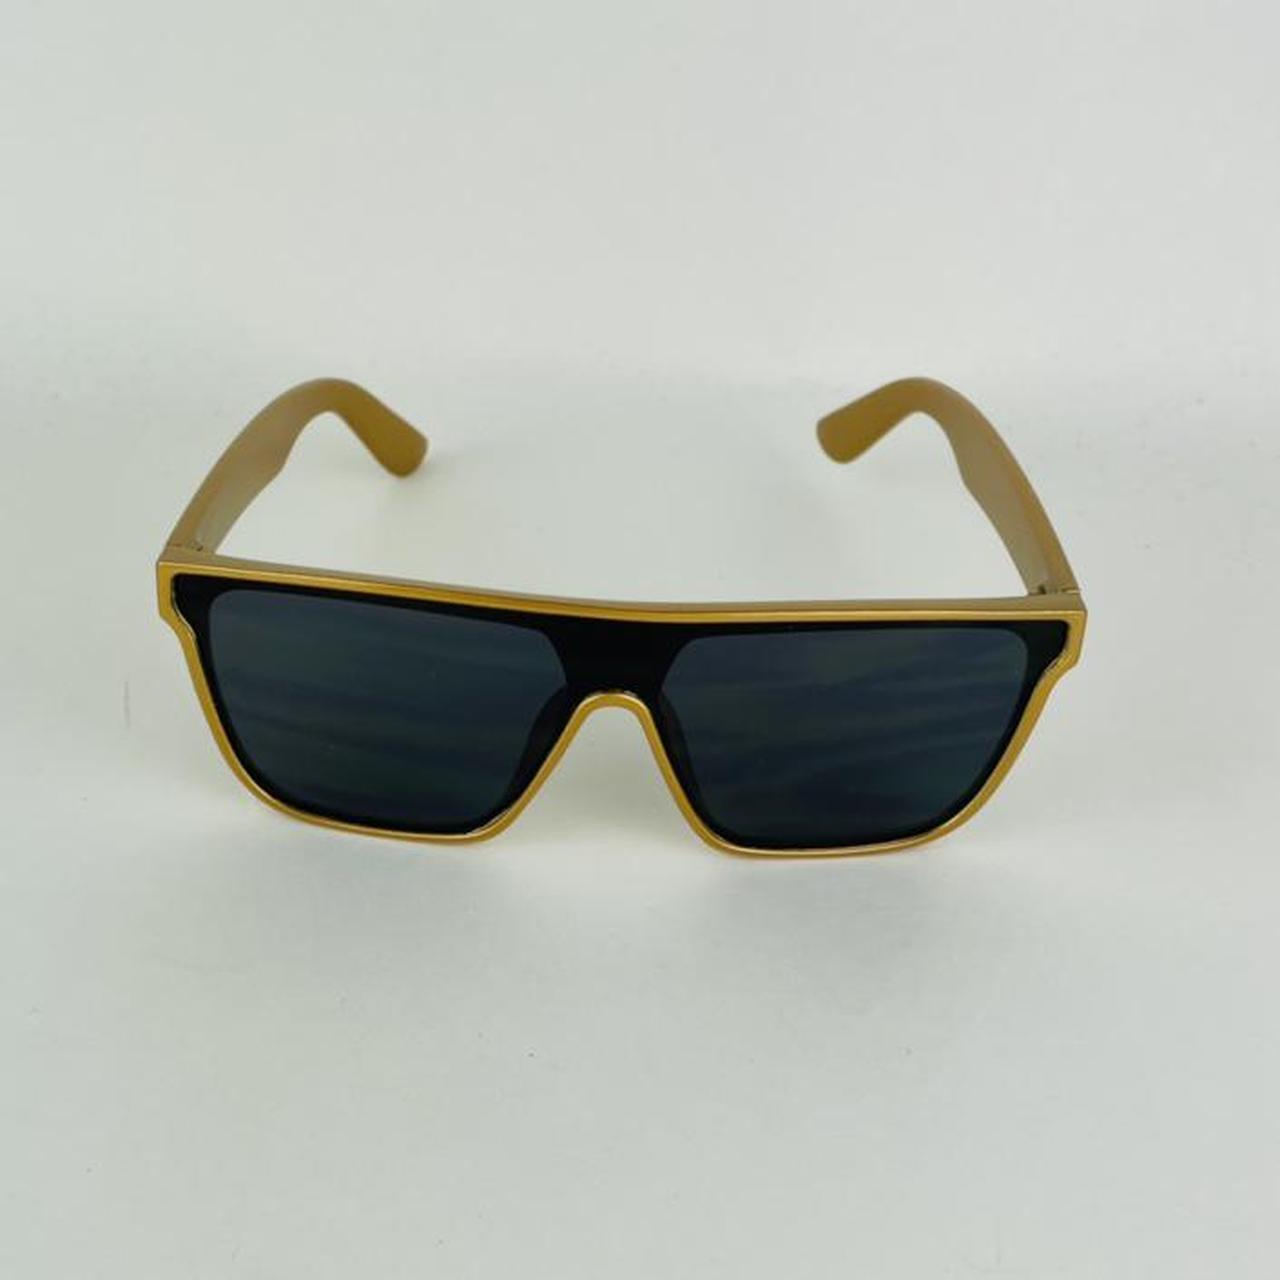 Product Image 3 - Gold frame and dark lenses#